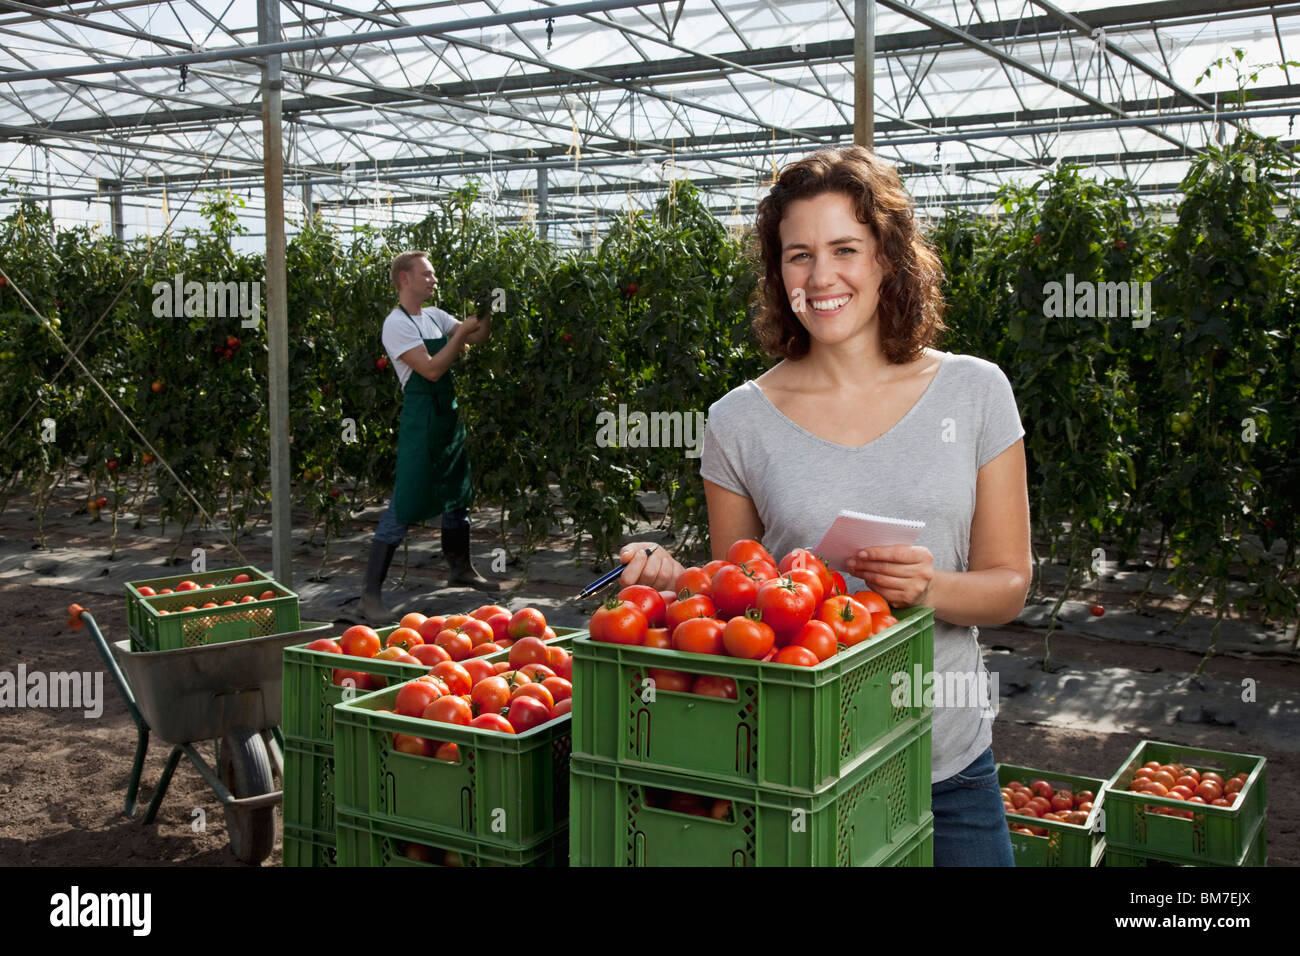 A woman standing behind crates of fresh tomatoes working in a commercial greenhouse Stock Photo